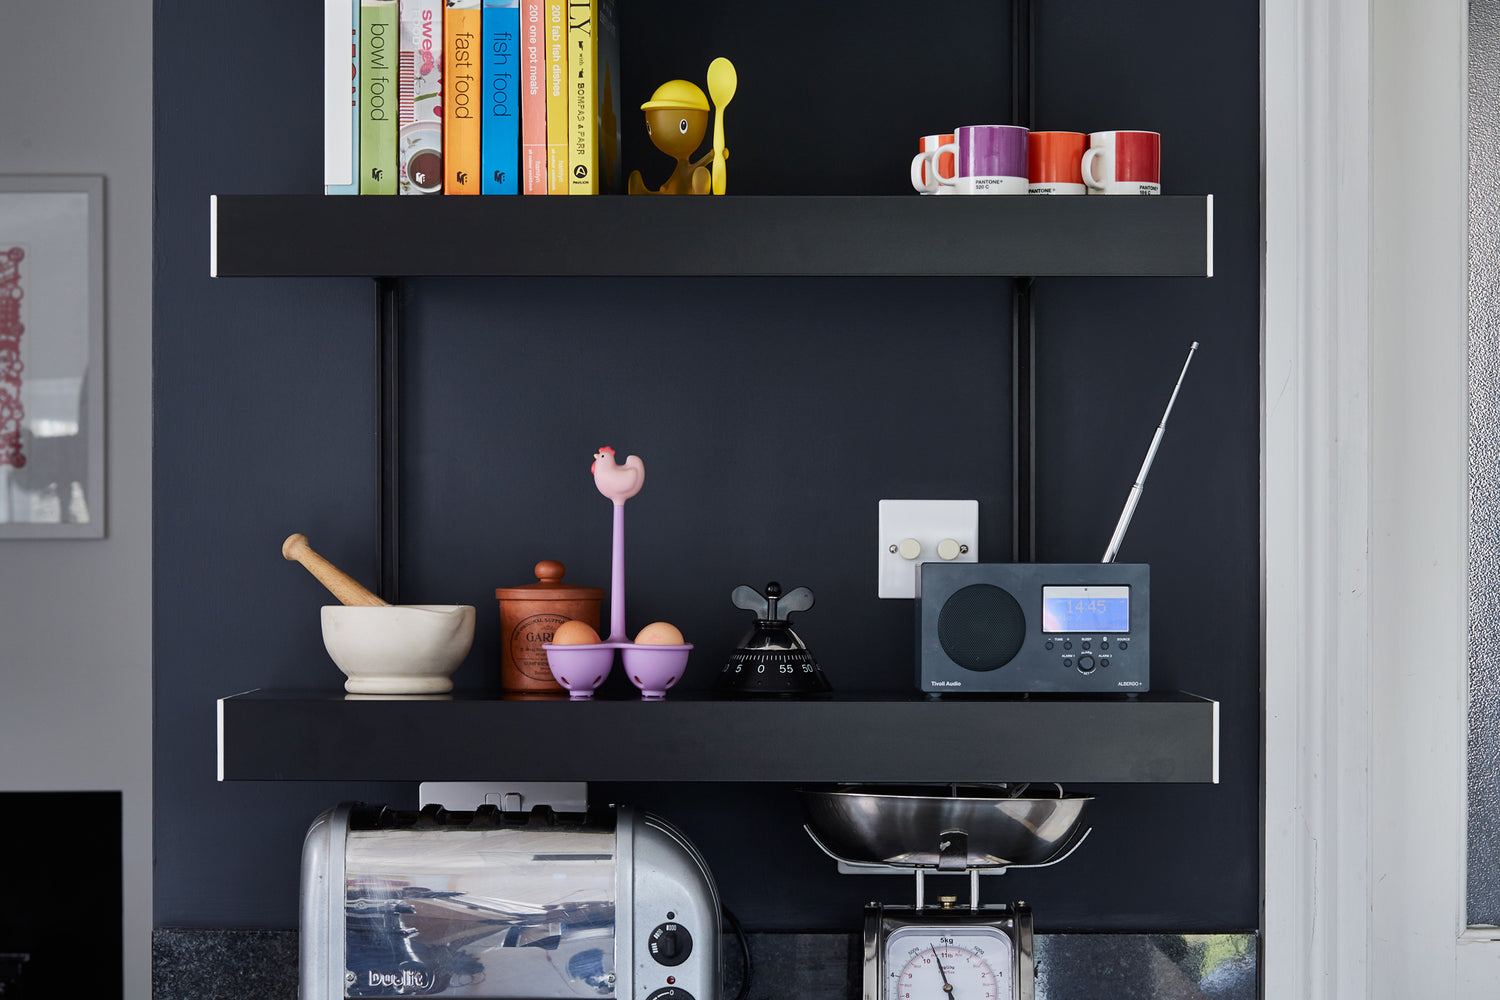 small black kitchen shelving system wall mounted on black wall